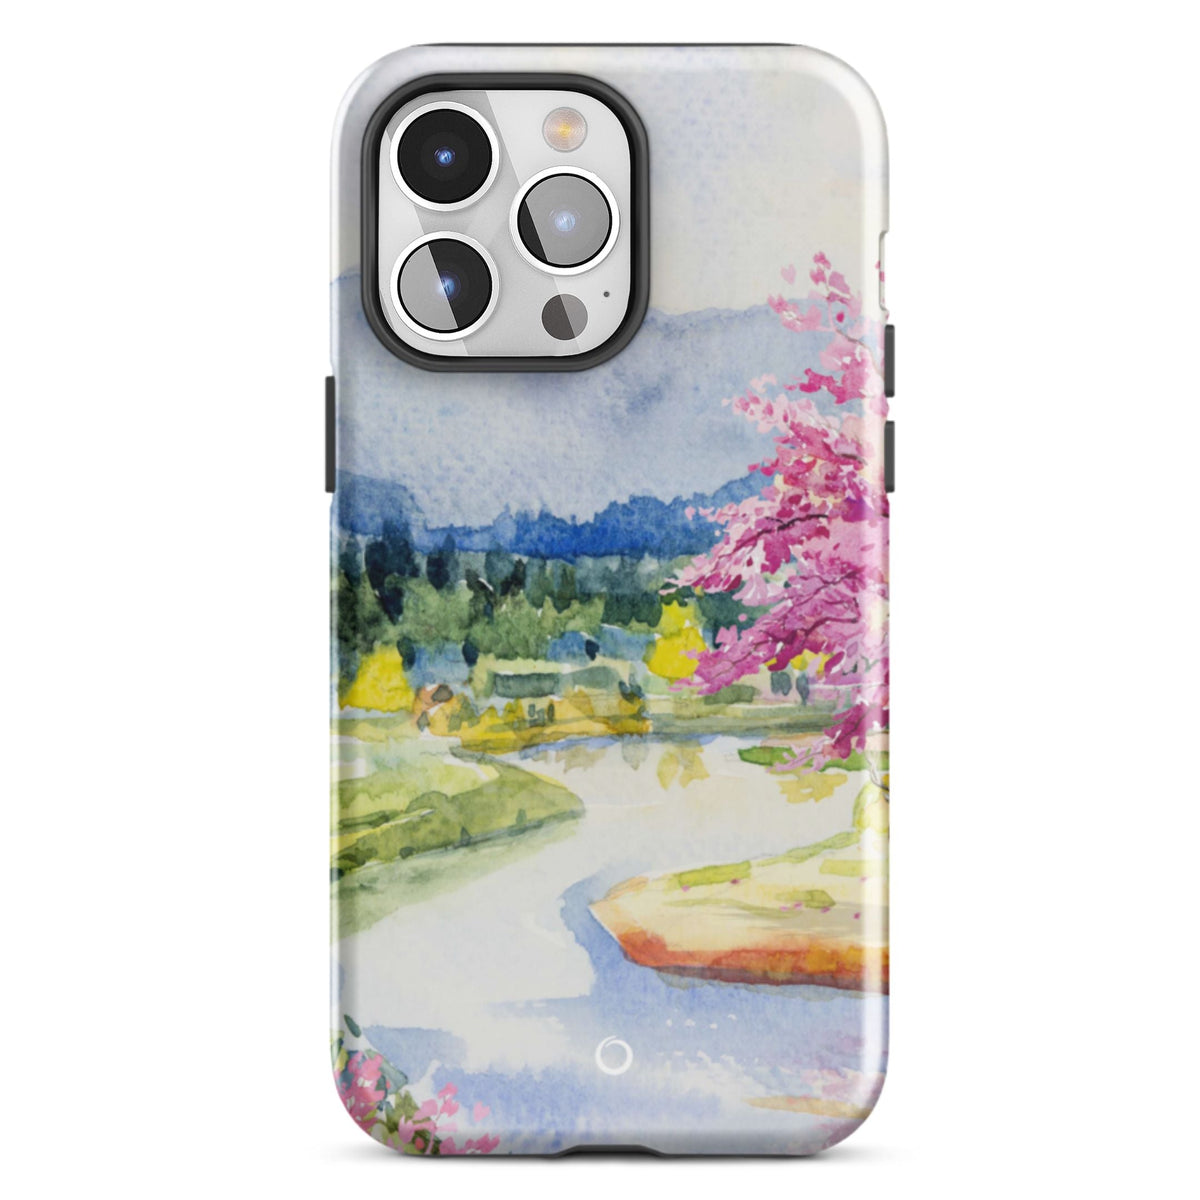 Majestic Landscapes iPhone Case - Select a Device